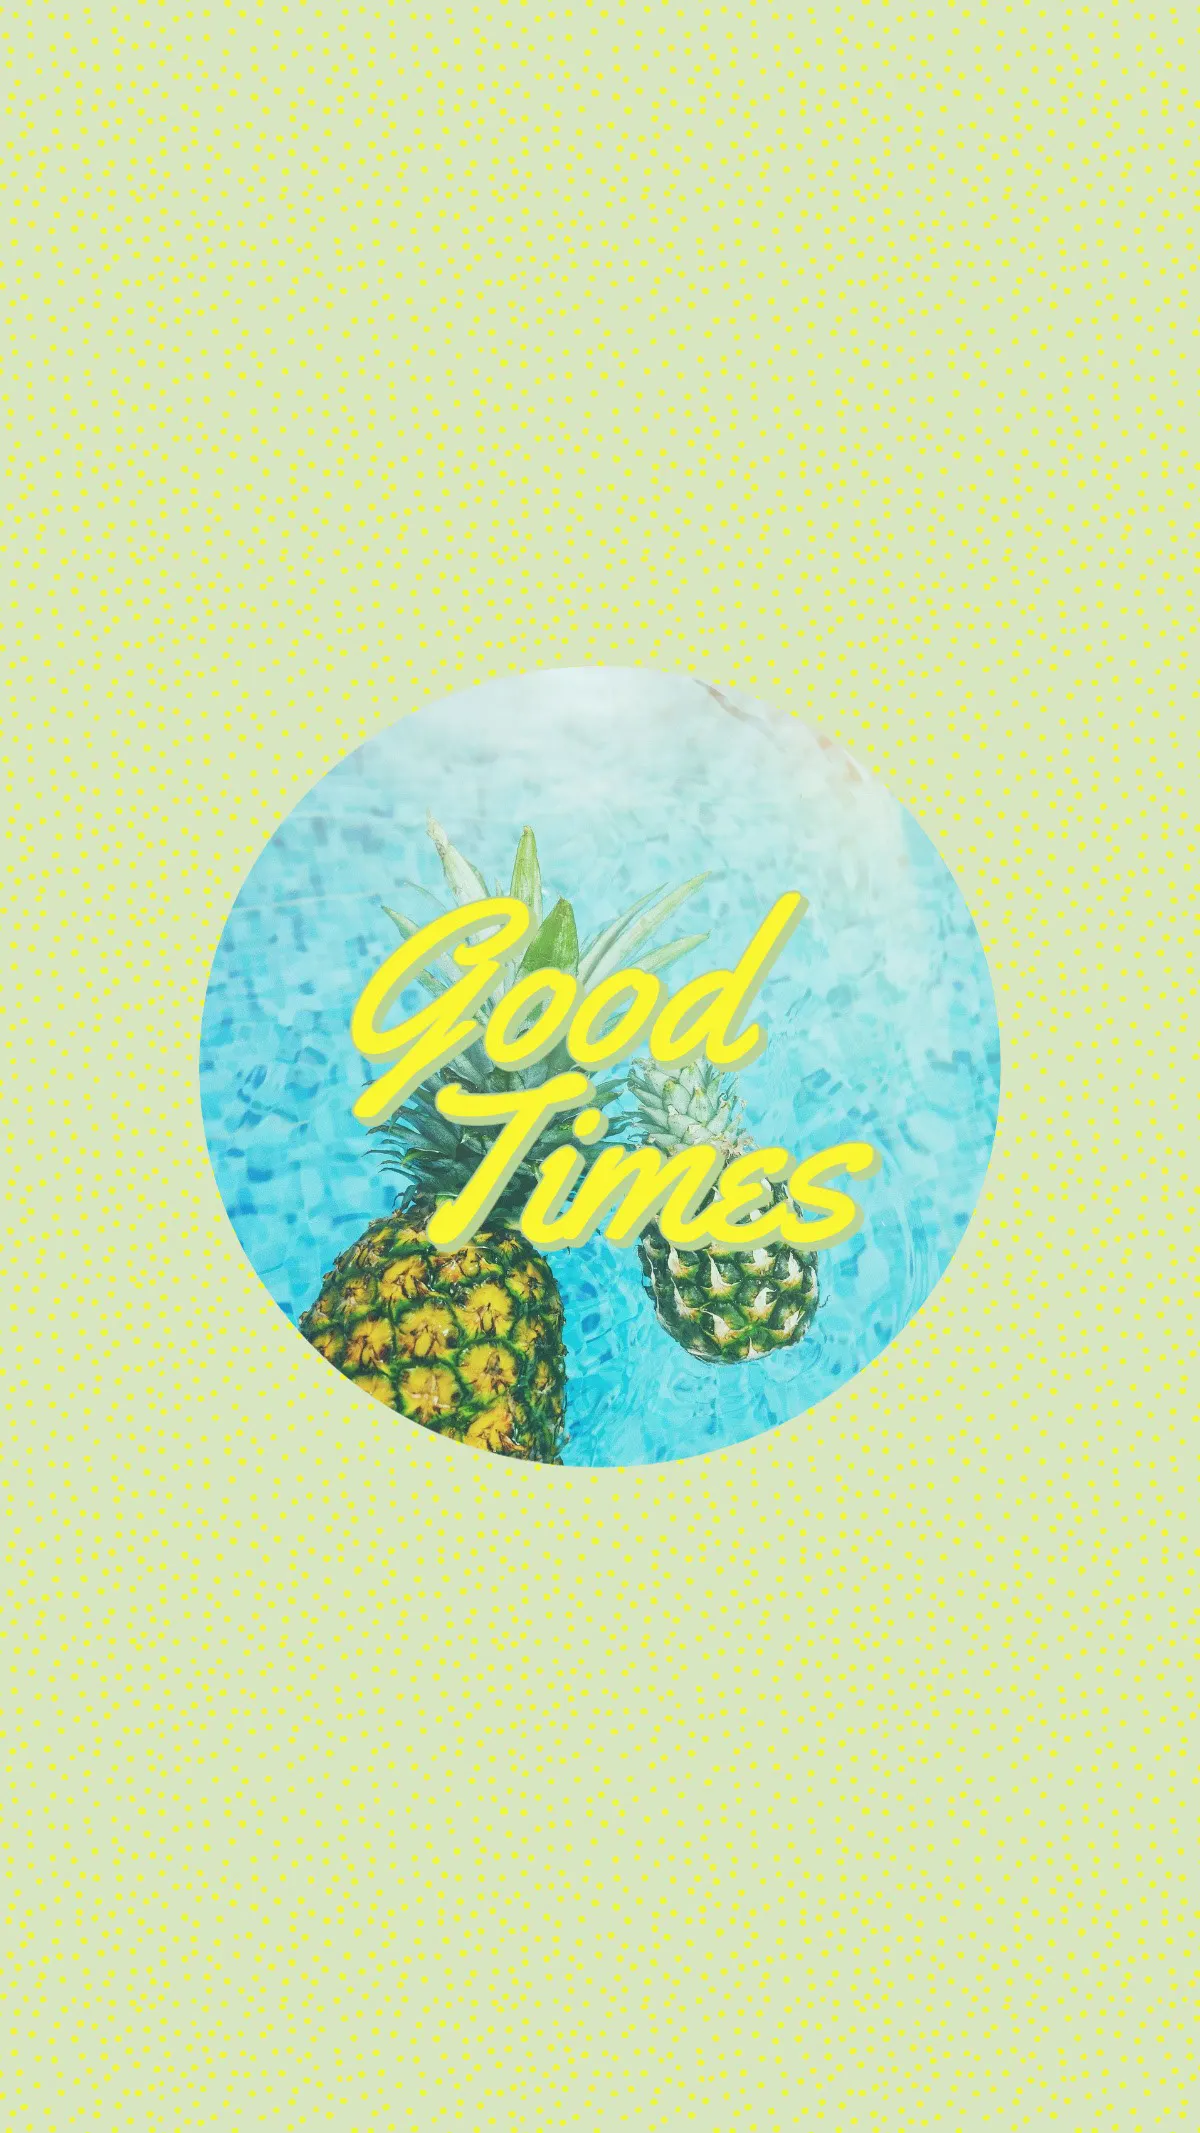 Good Times Bright Summer Photo Phone wallpaper with Green and Yellow Dots